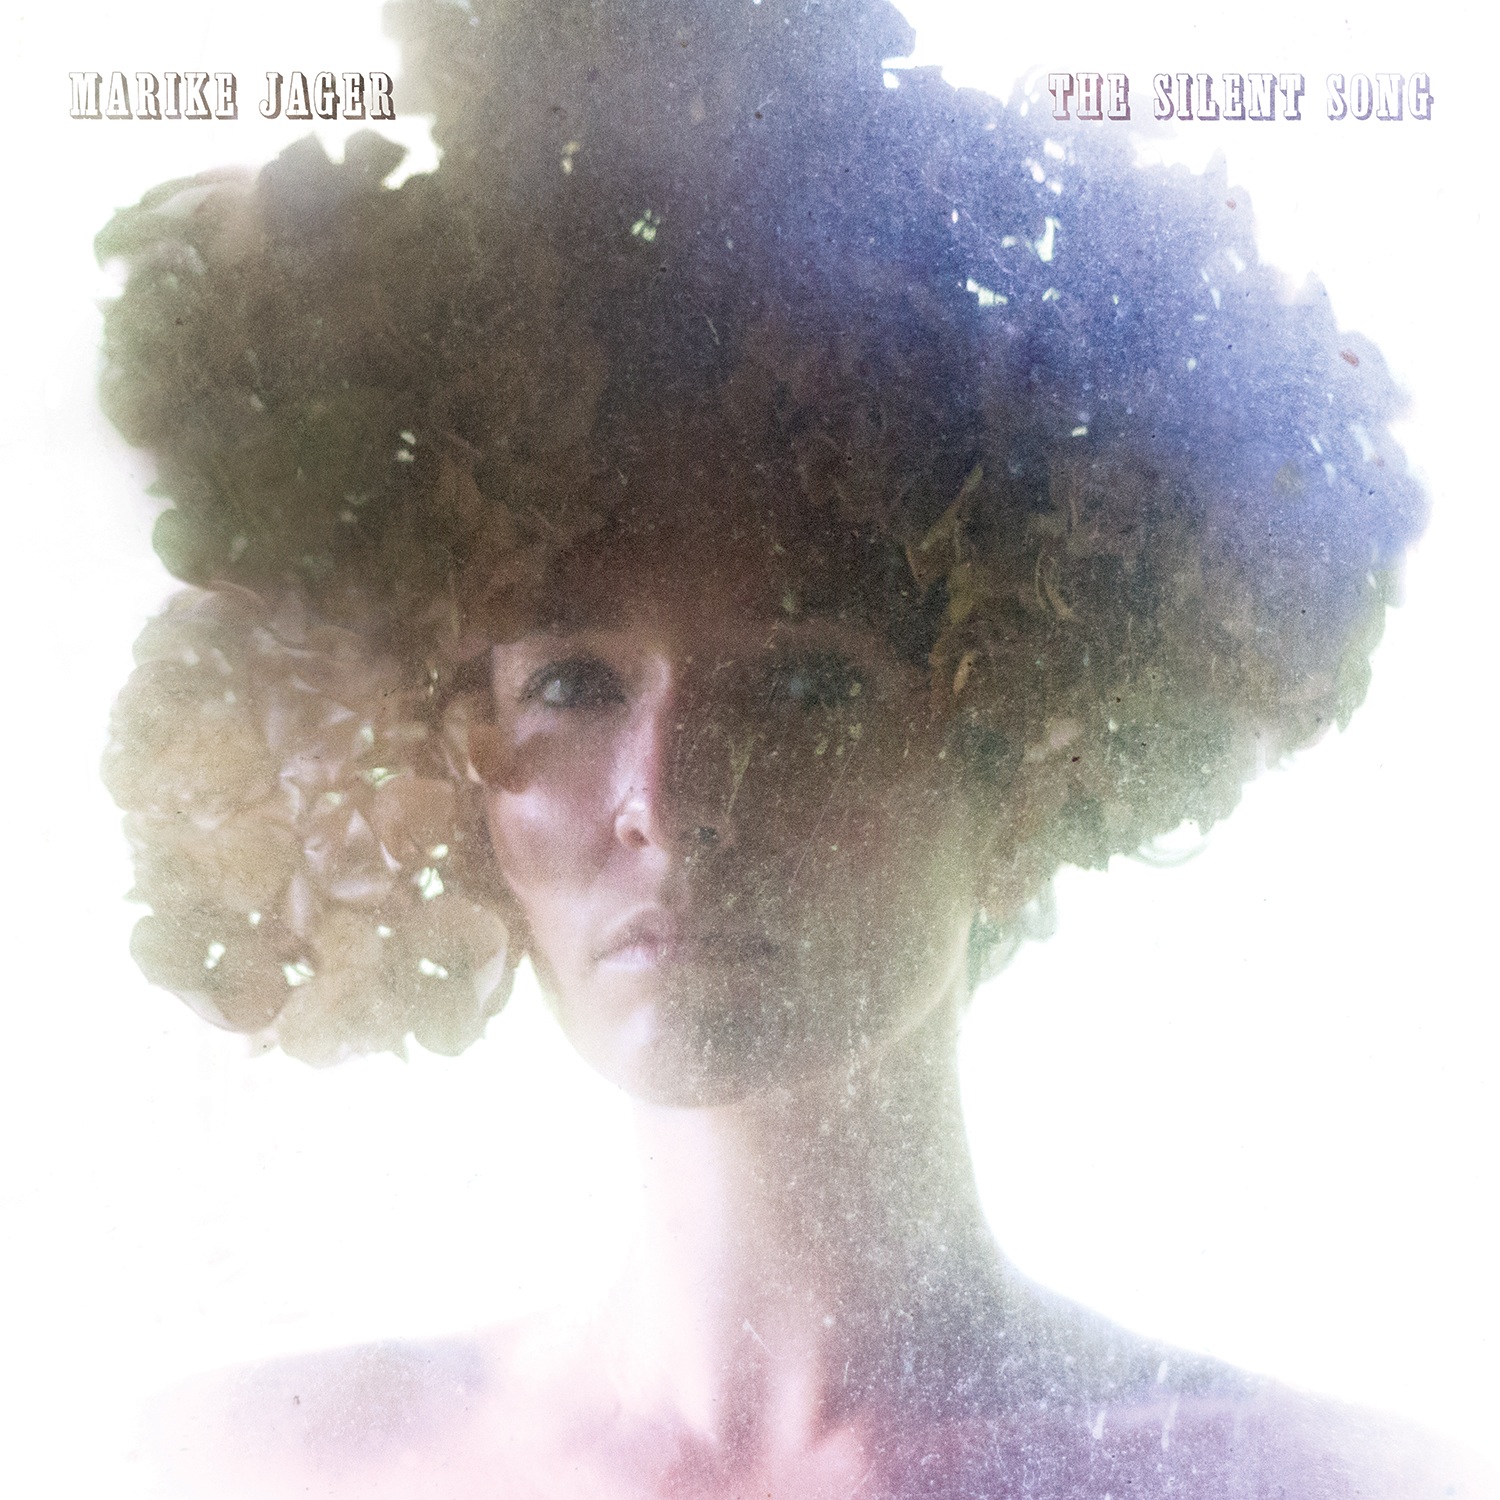 The Silent Song - Marike Jager - Album Cover